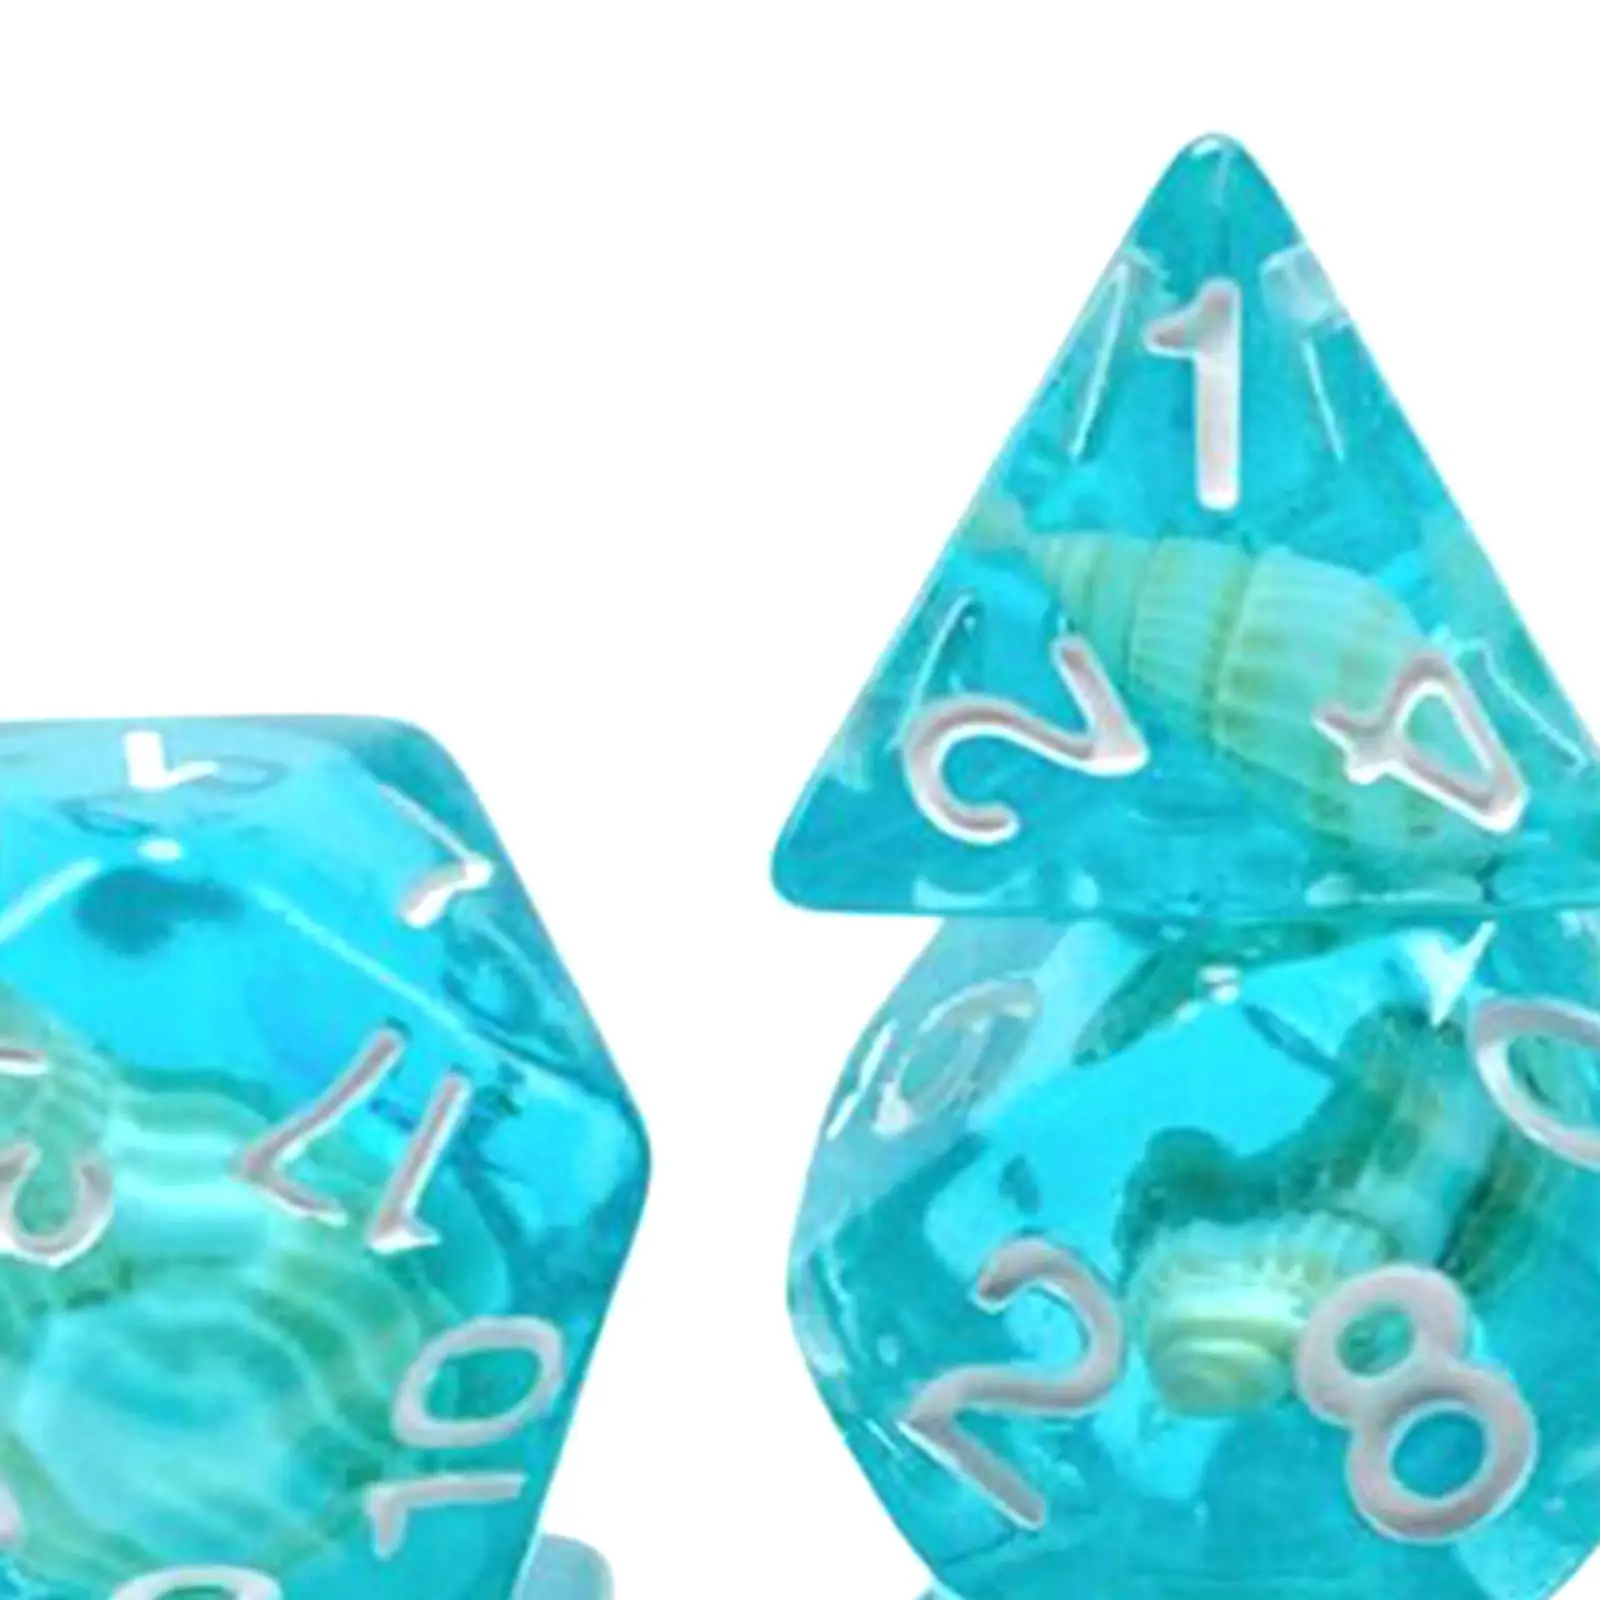 7 Pieces Polyhedral Dices Set D4 D8 D10 D12 D20 Playing Dices Role Playing Game Dices Translucent Teal for Card Game Card Games